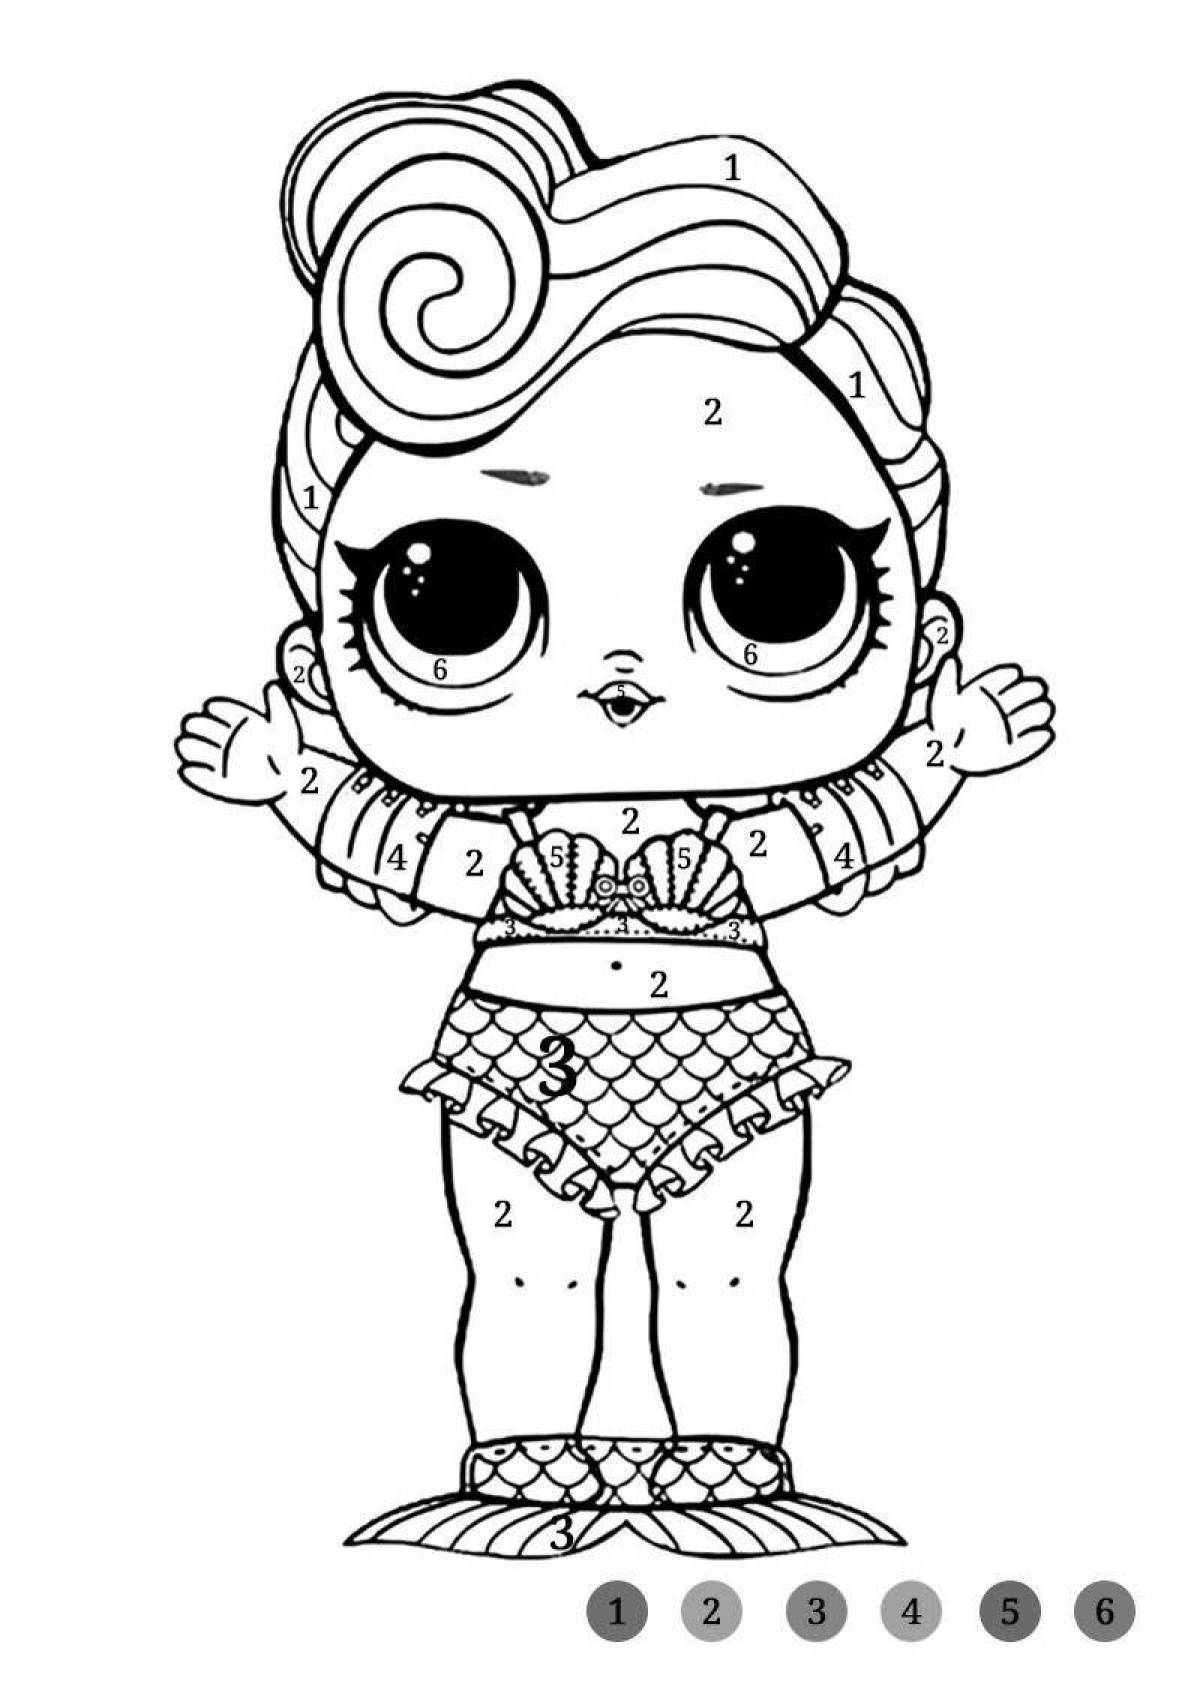 Daring lol print doll coloring pages